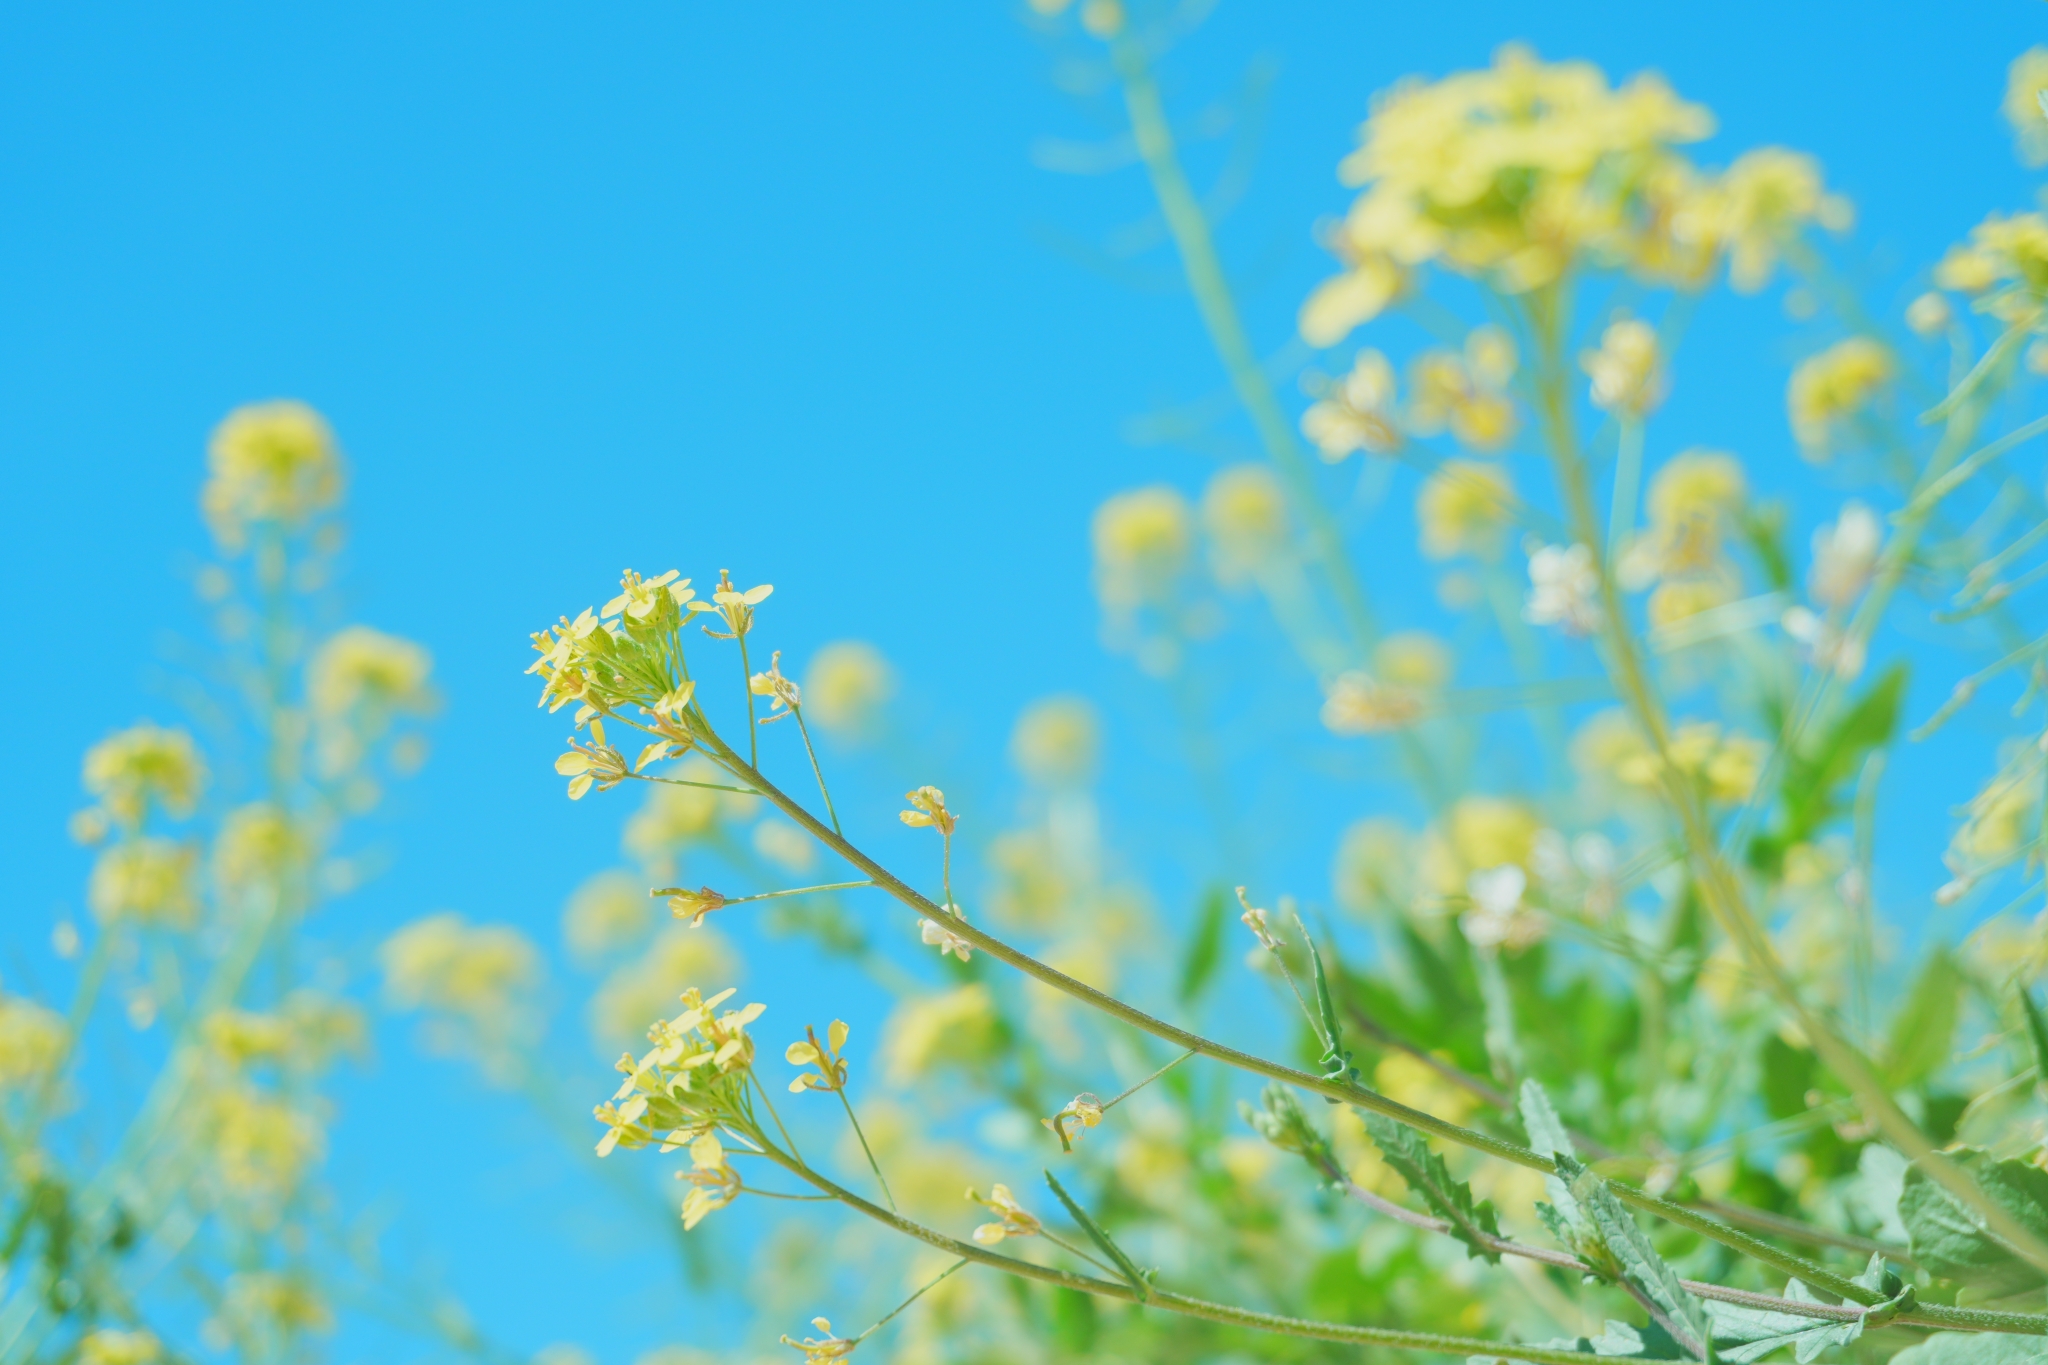 Sample image of canola flowers with deep foreground and background bokeh  Creative Look: Soft Highkey